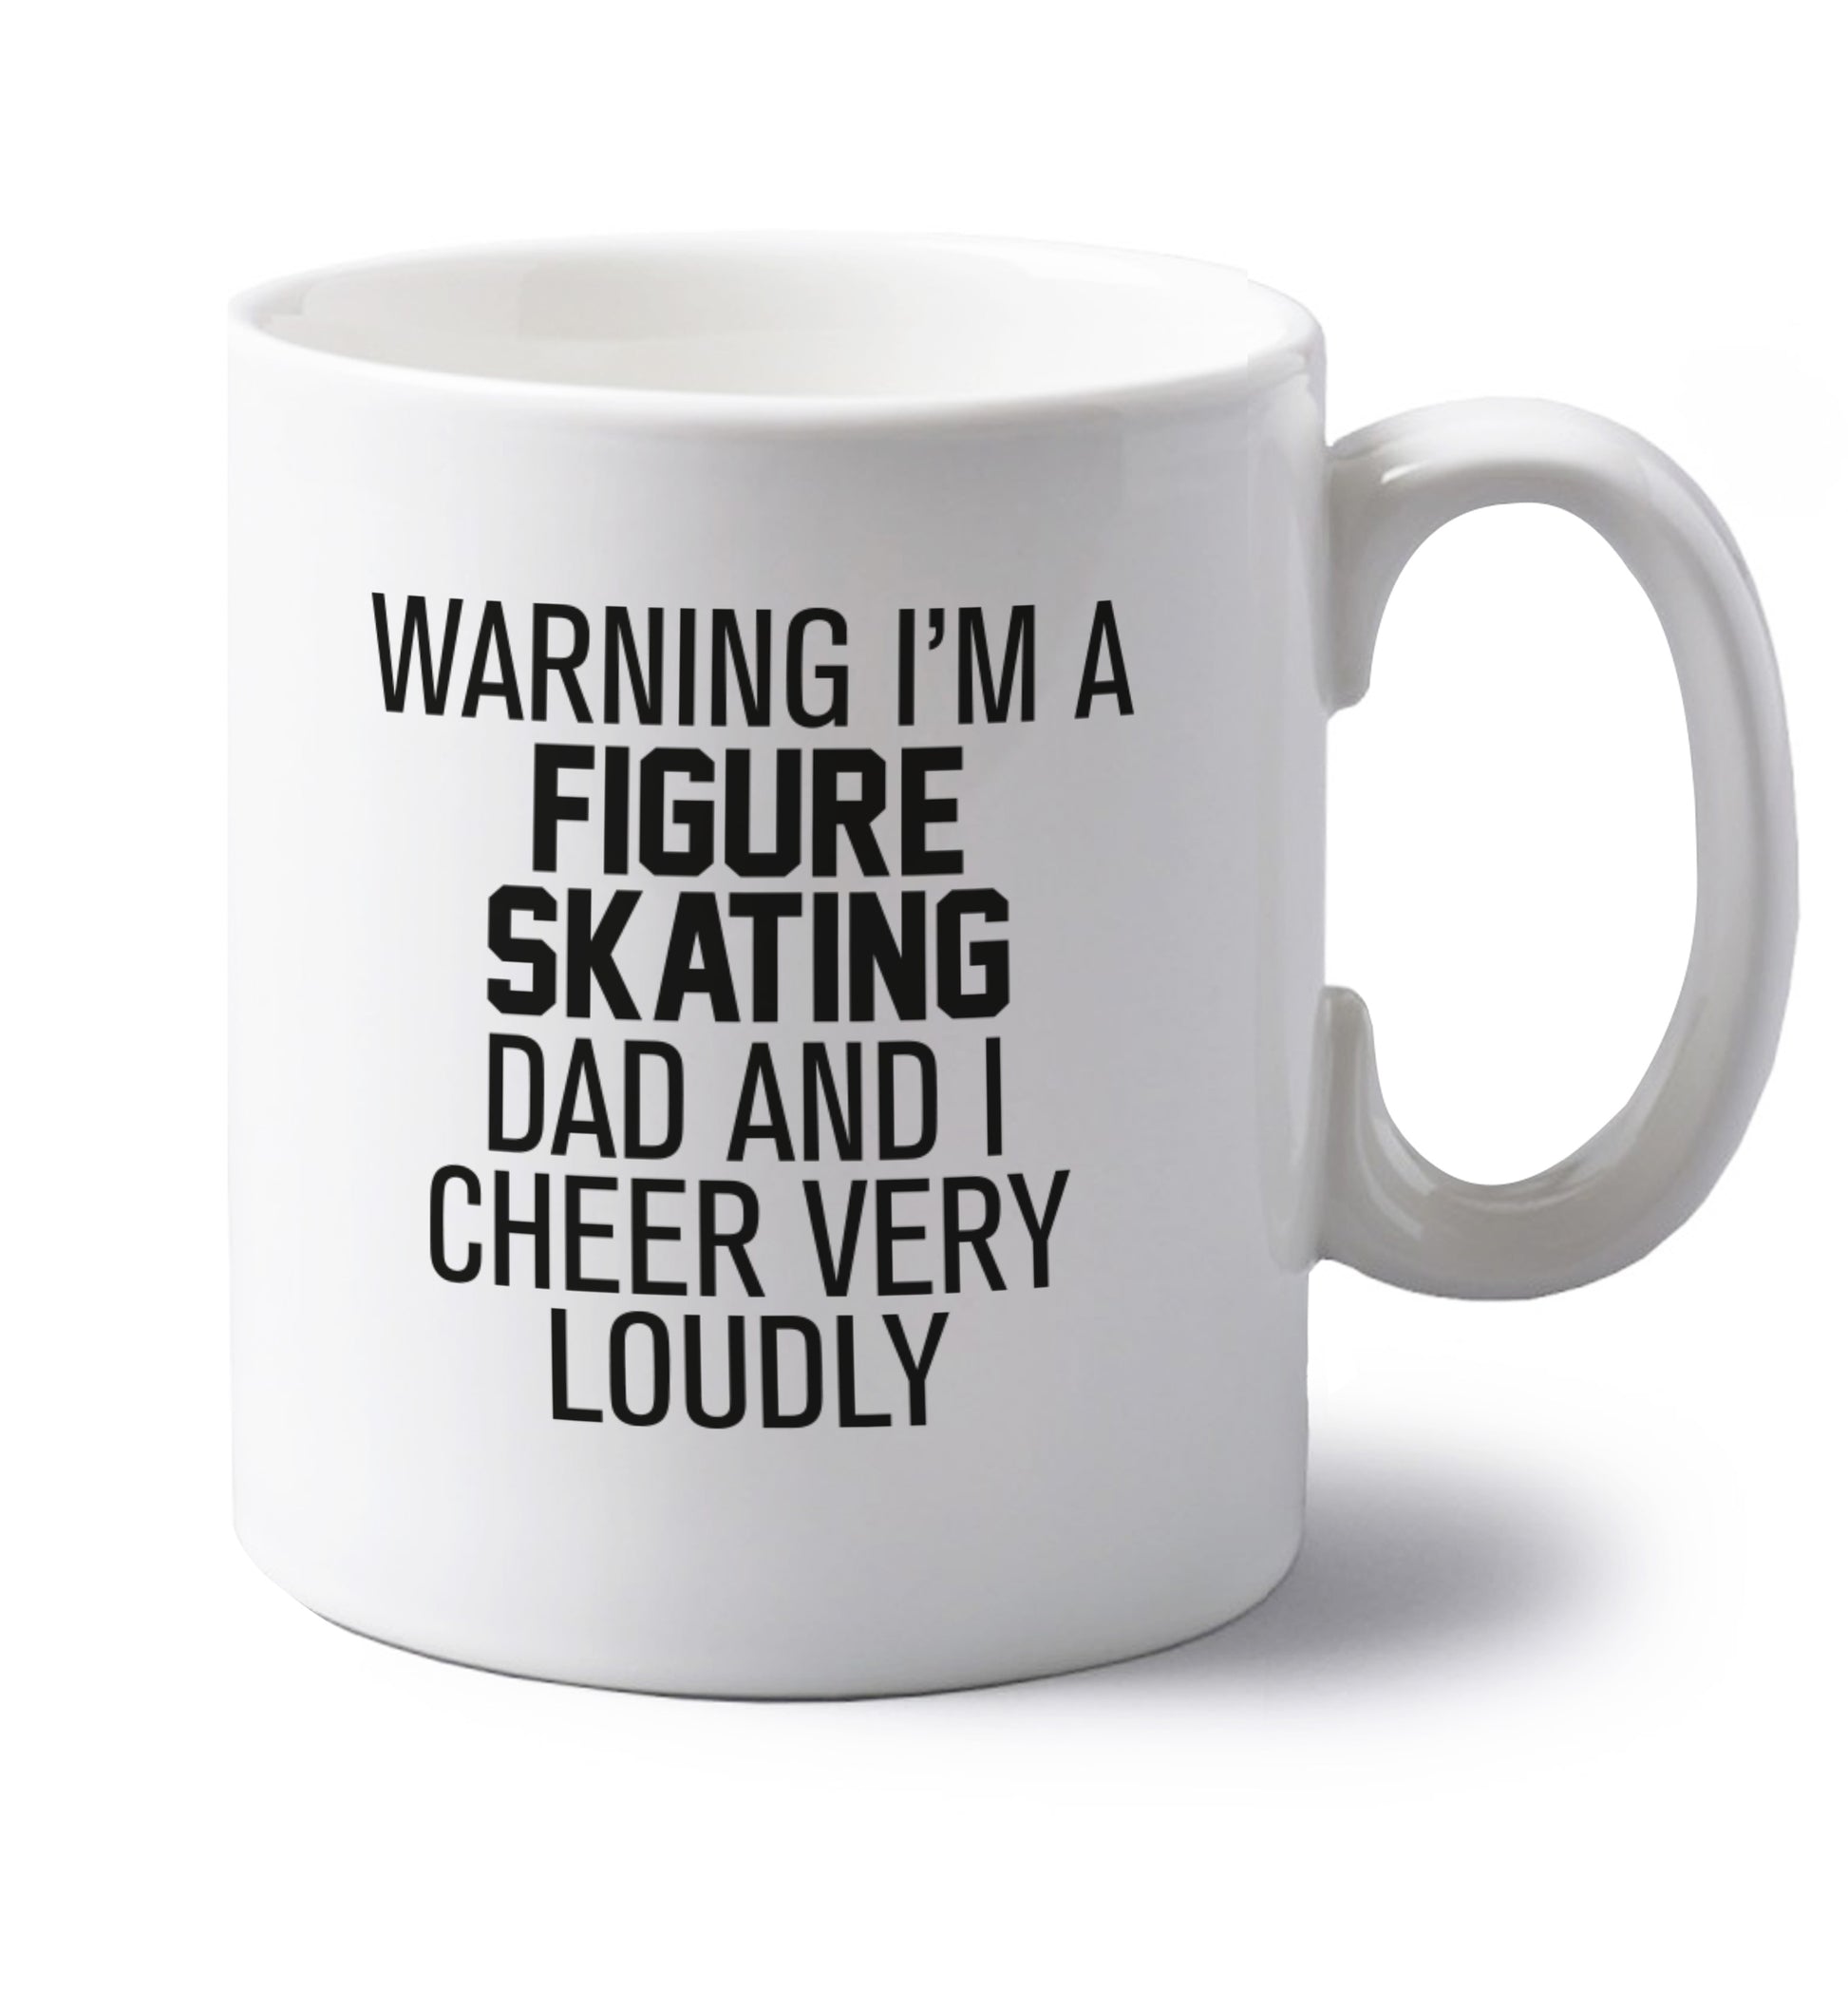 Warning I'm a figure skating dad and I cheer very loudly left handed white ceramic mug 